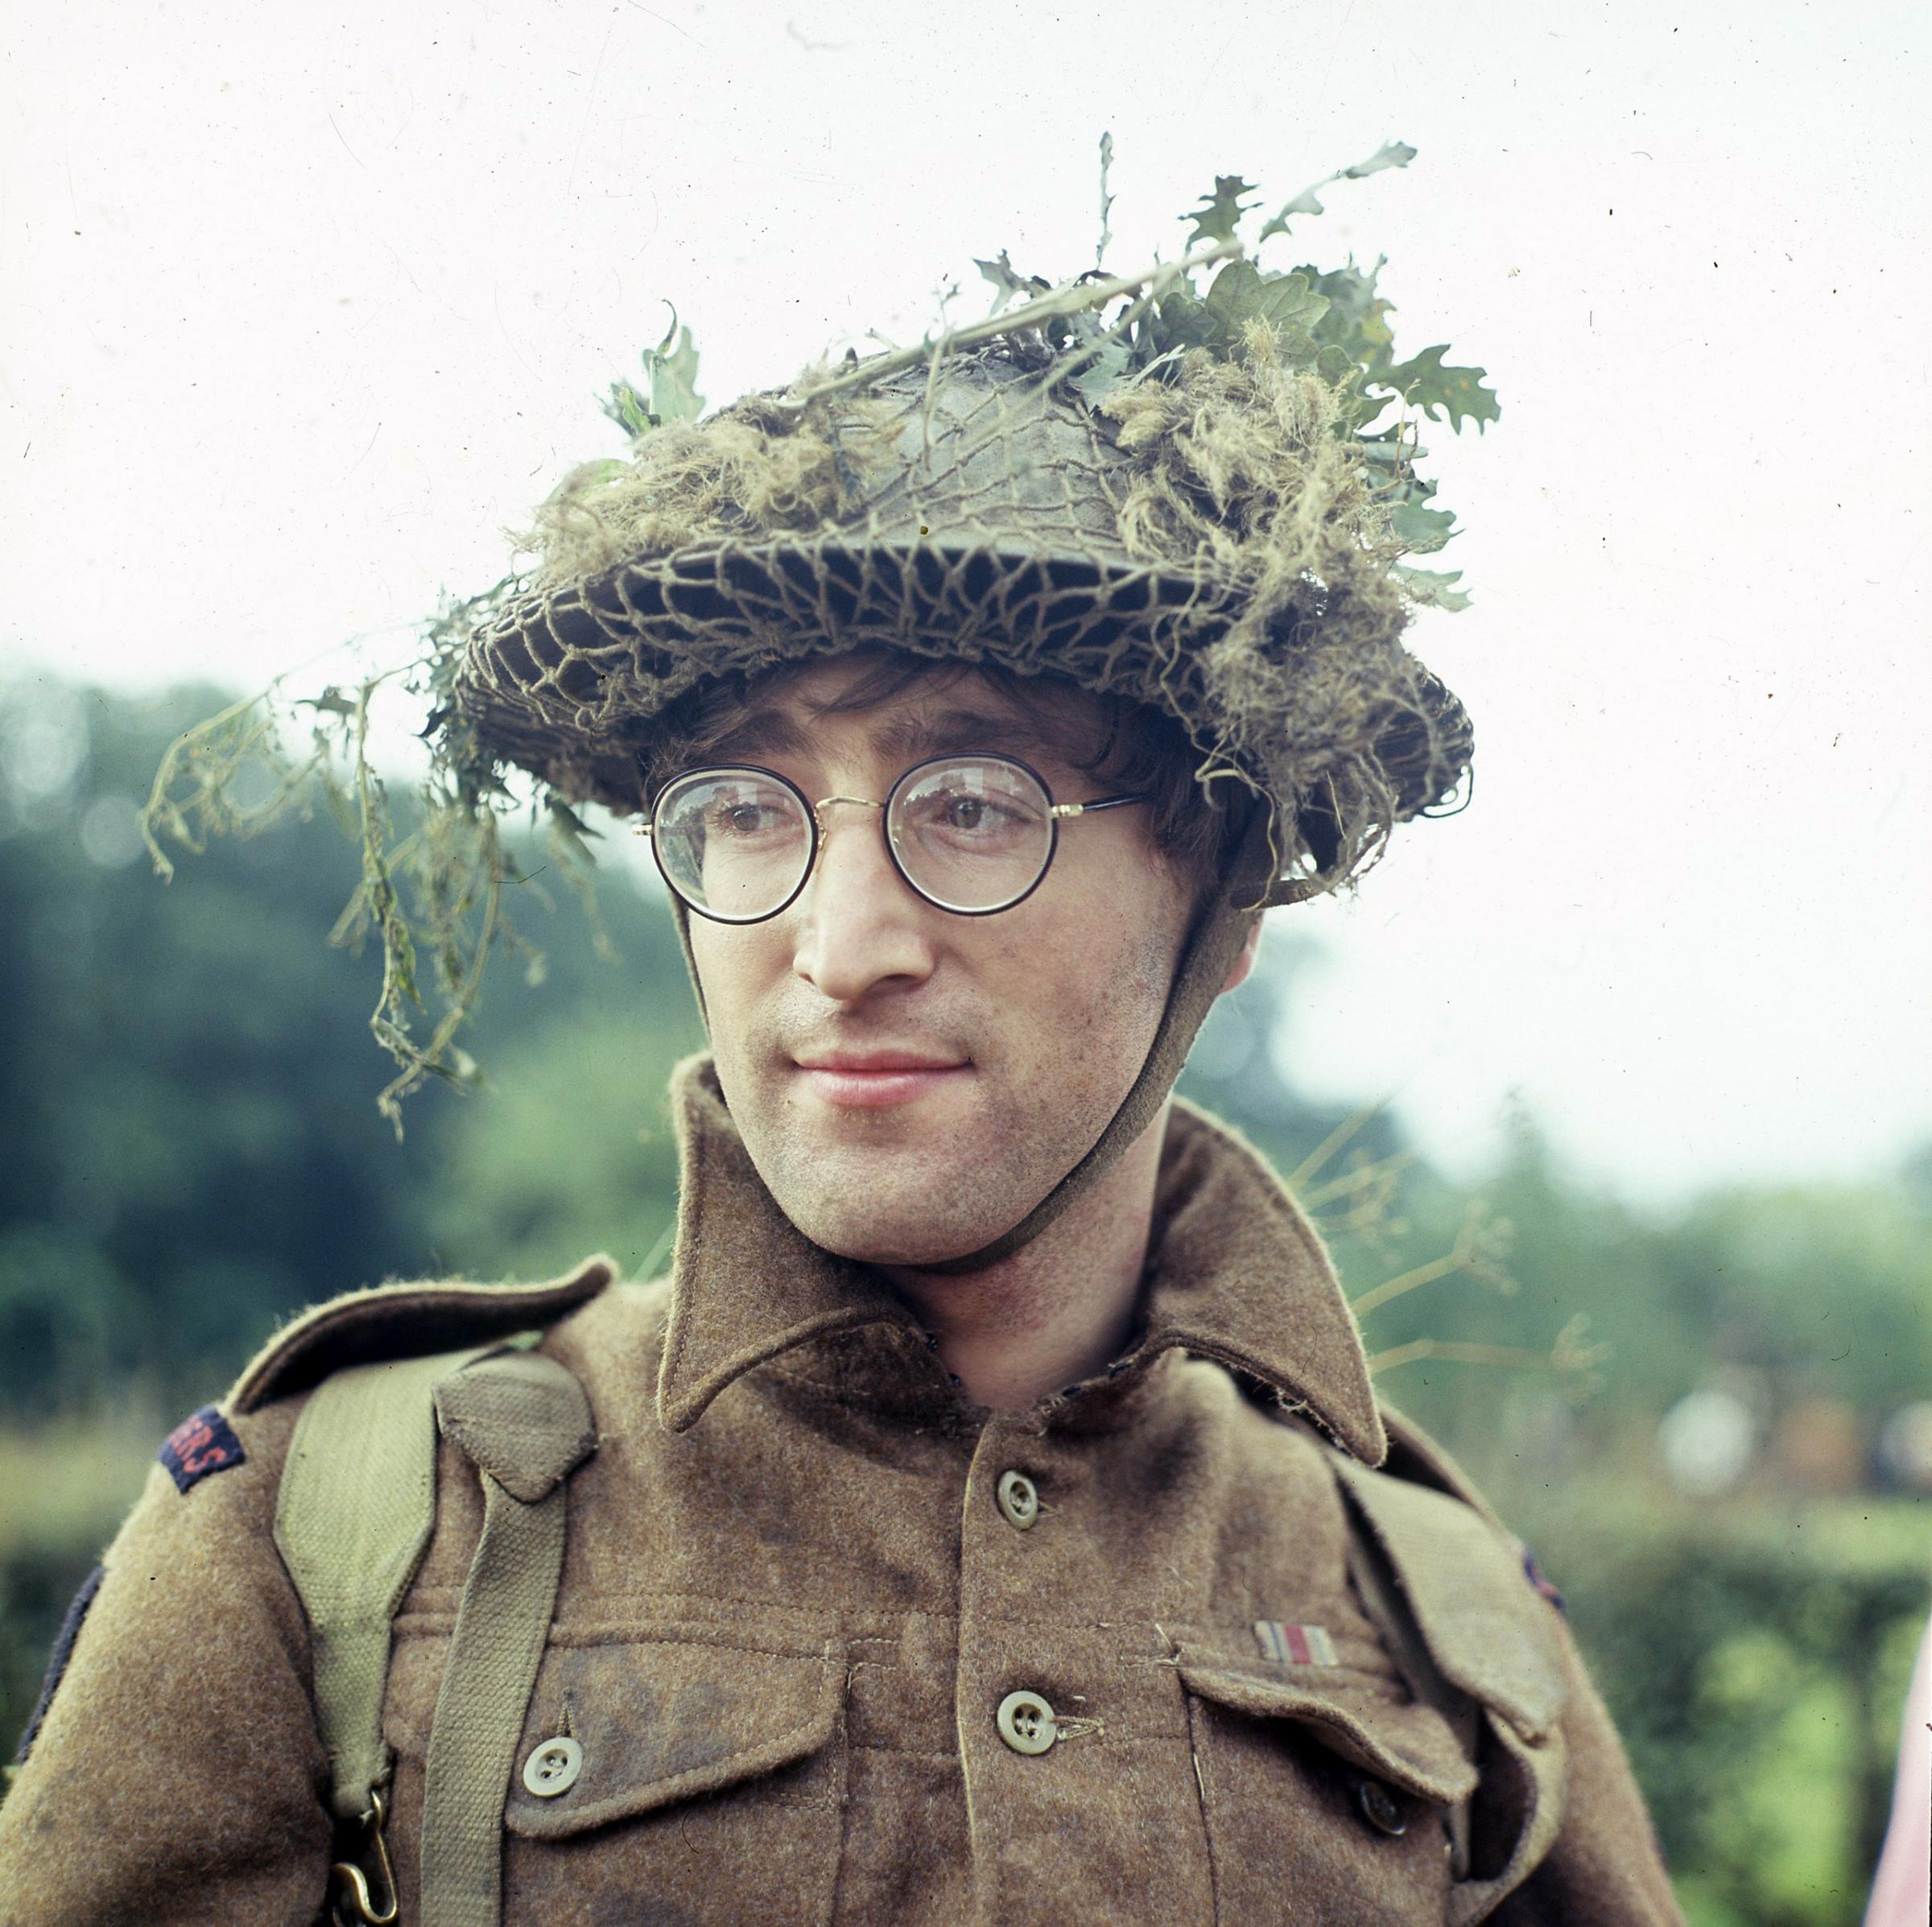 John Lennon in character as Musketeer Gripweed during the filming of the Dick Lester film 'How I Won The War' in September 1966 in Germany.